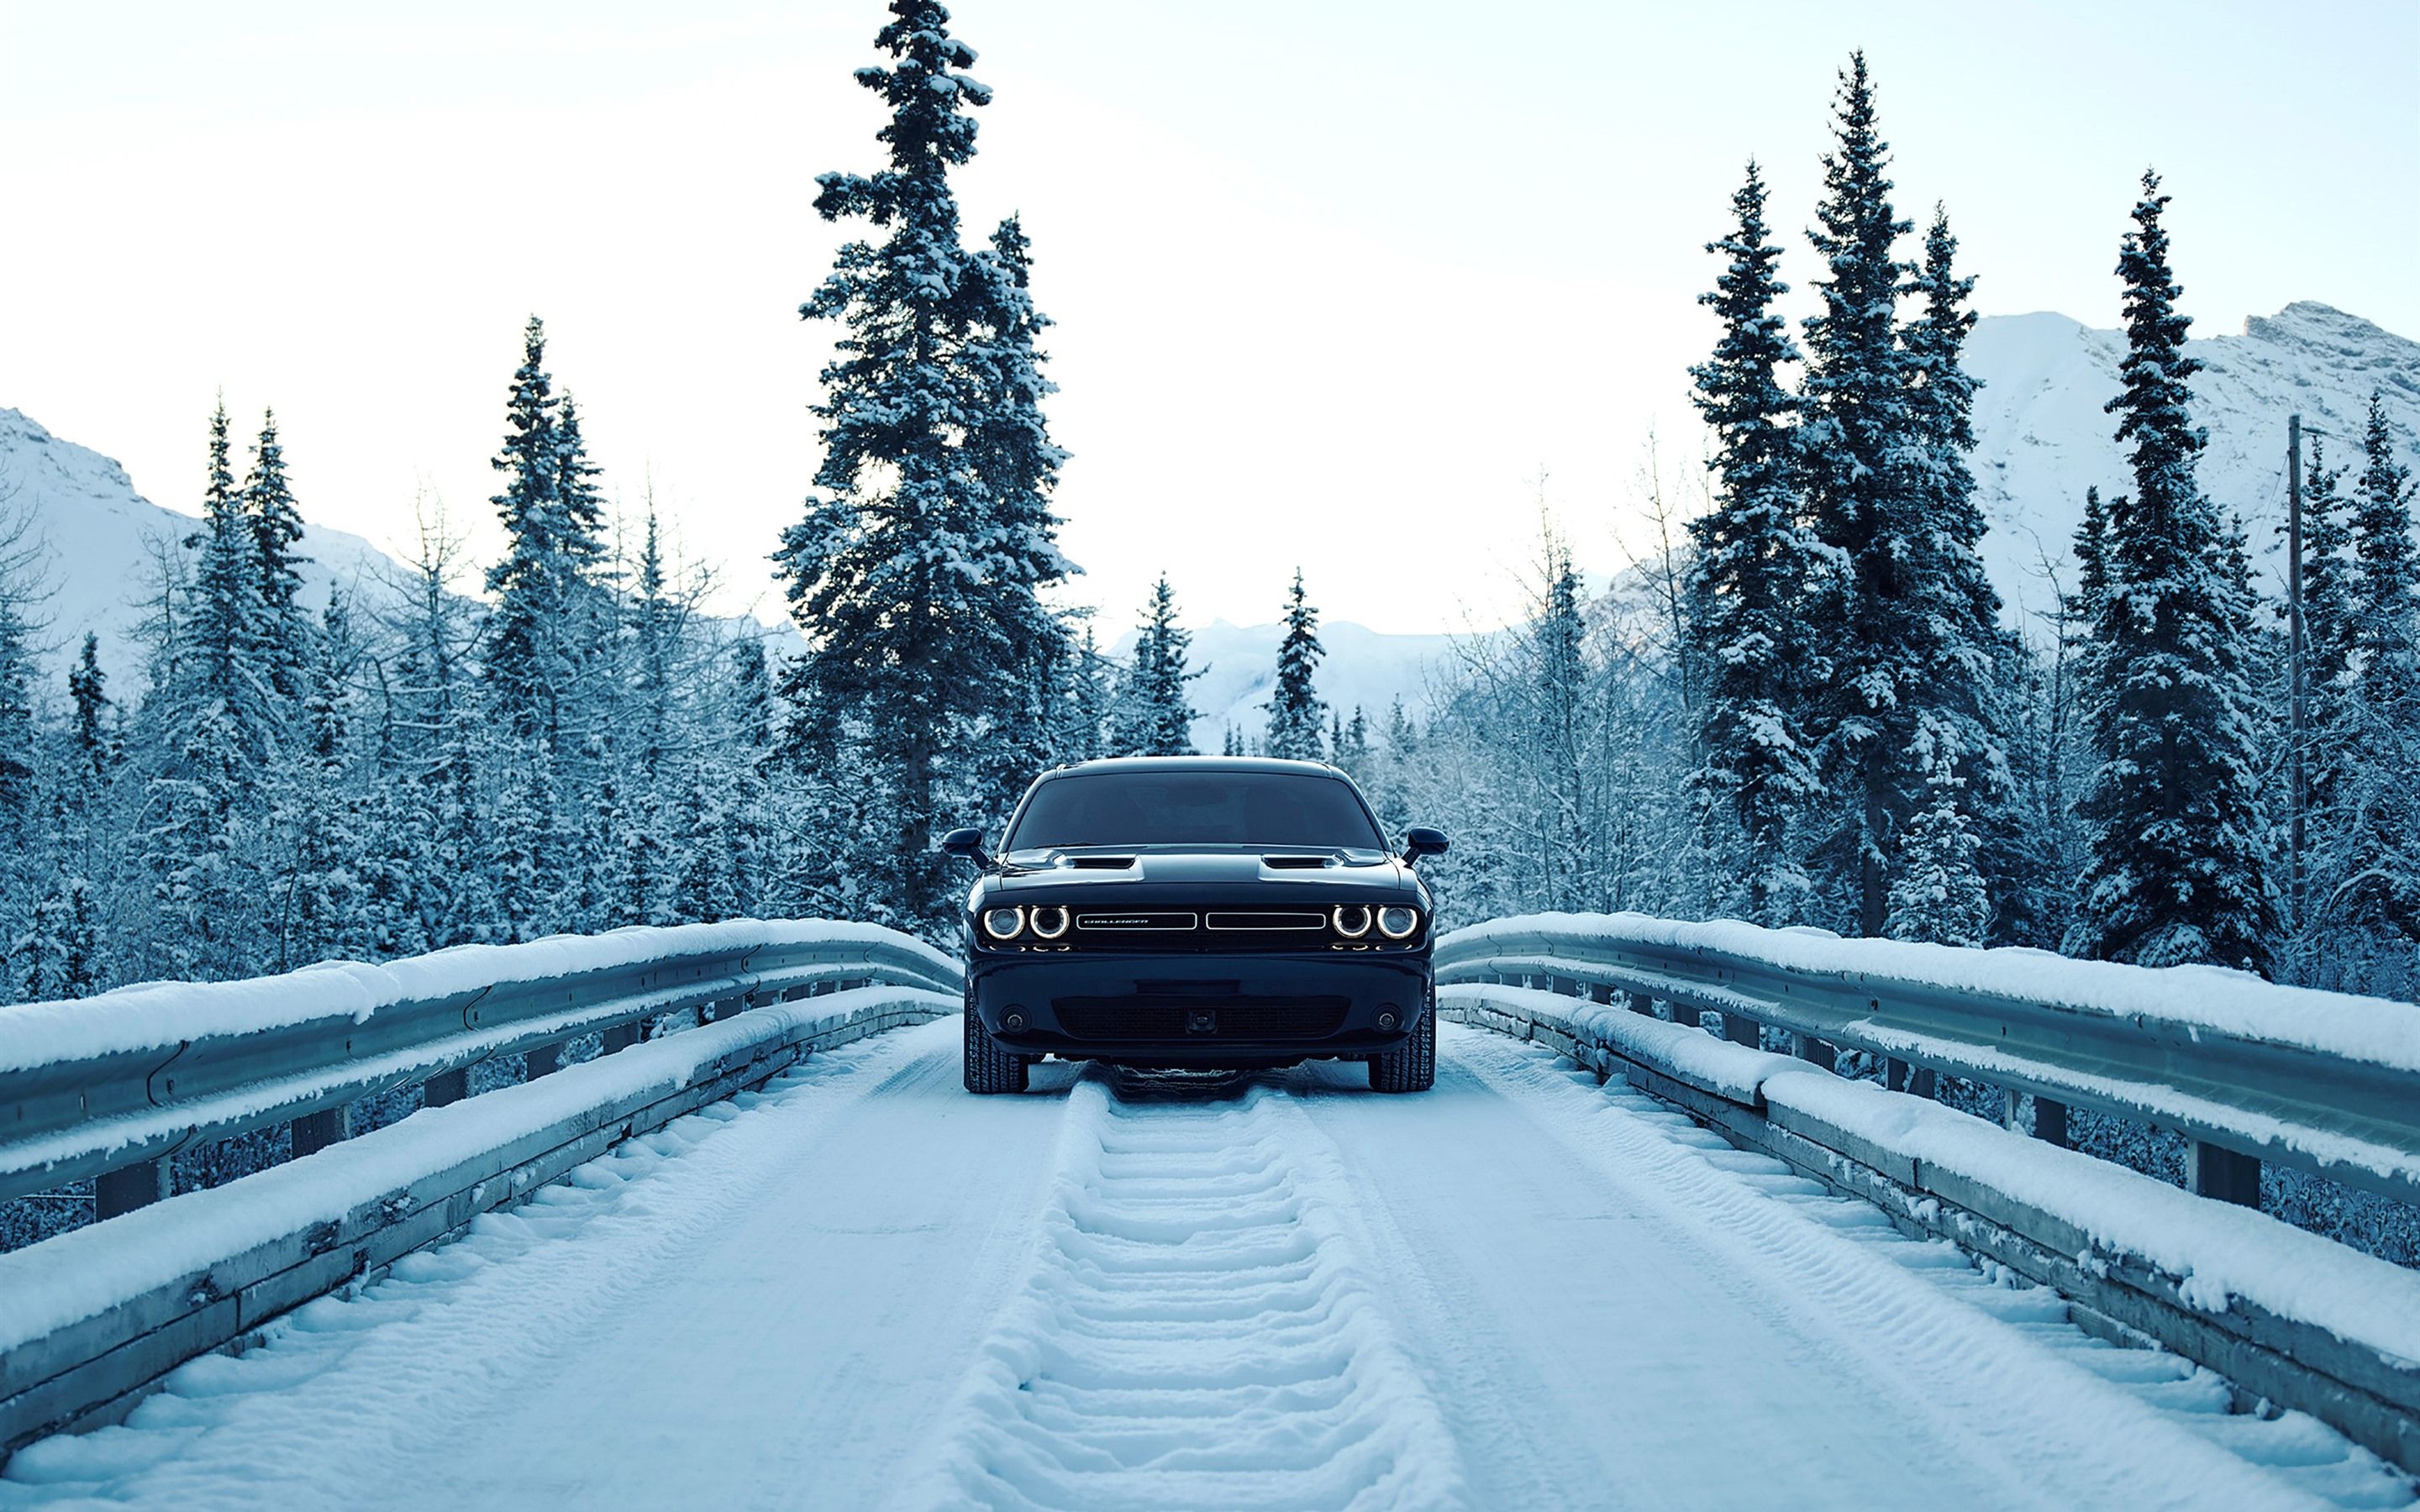 Wallpaper Dodge car front view, snow, winter, road 2880x1800 HD Picture, Image